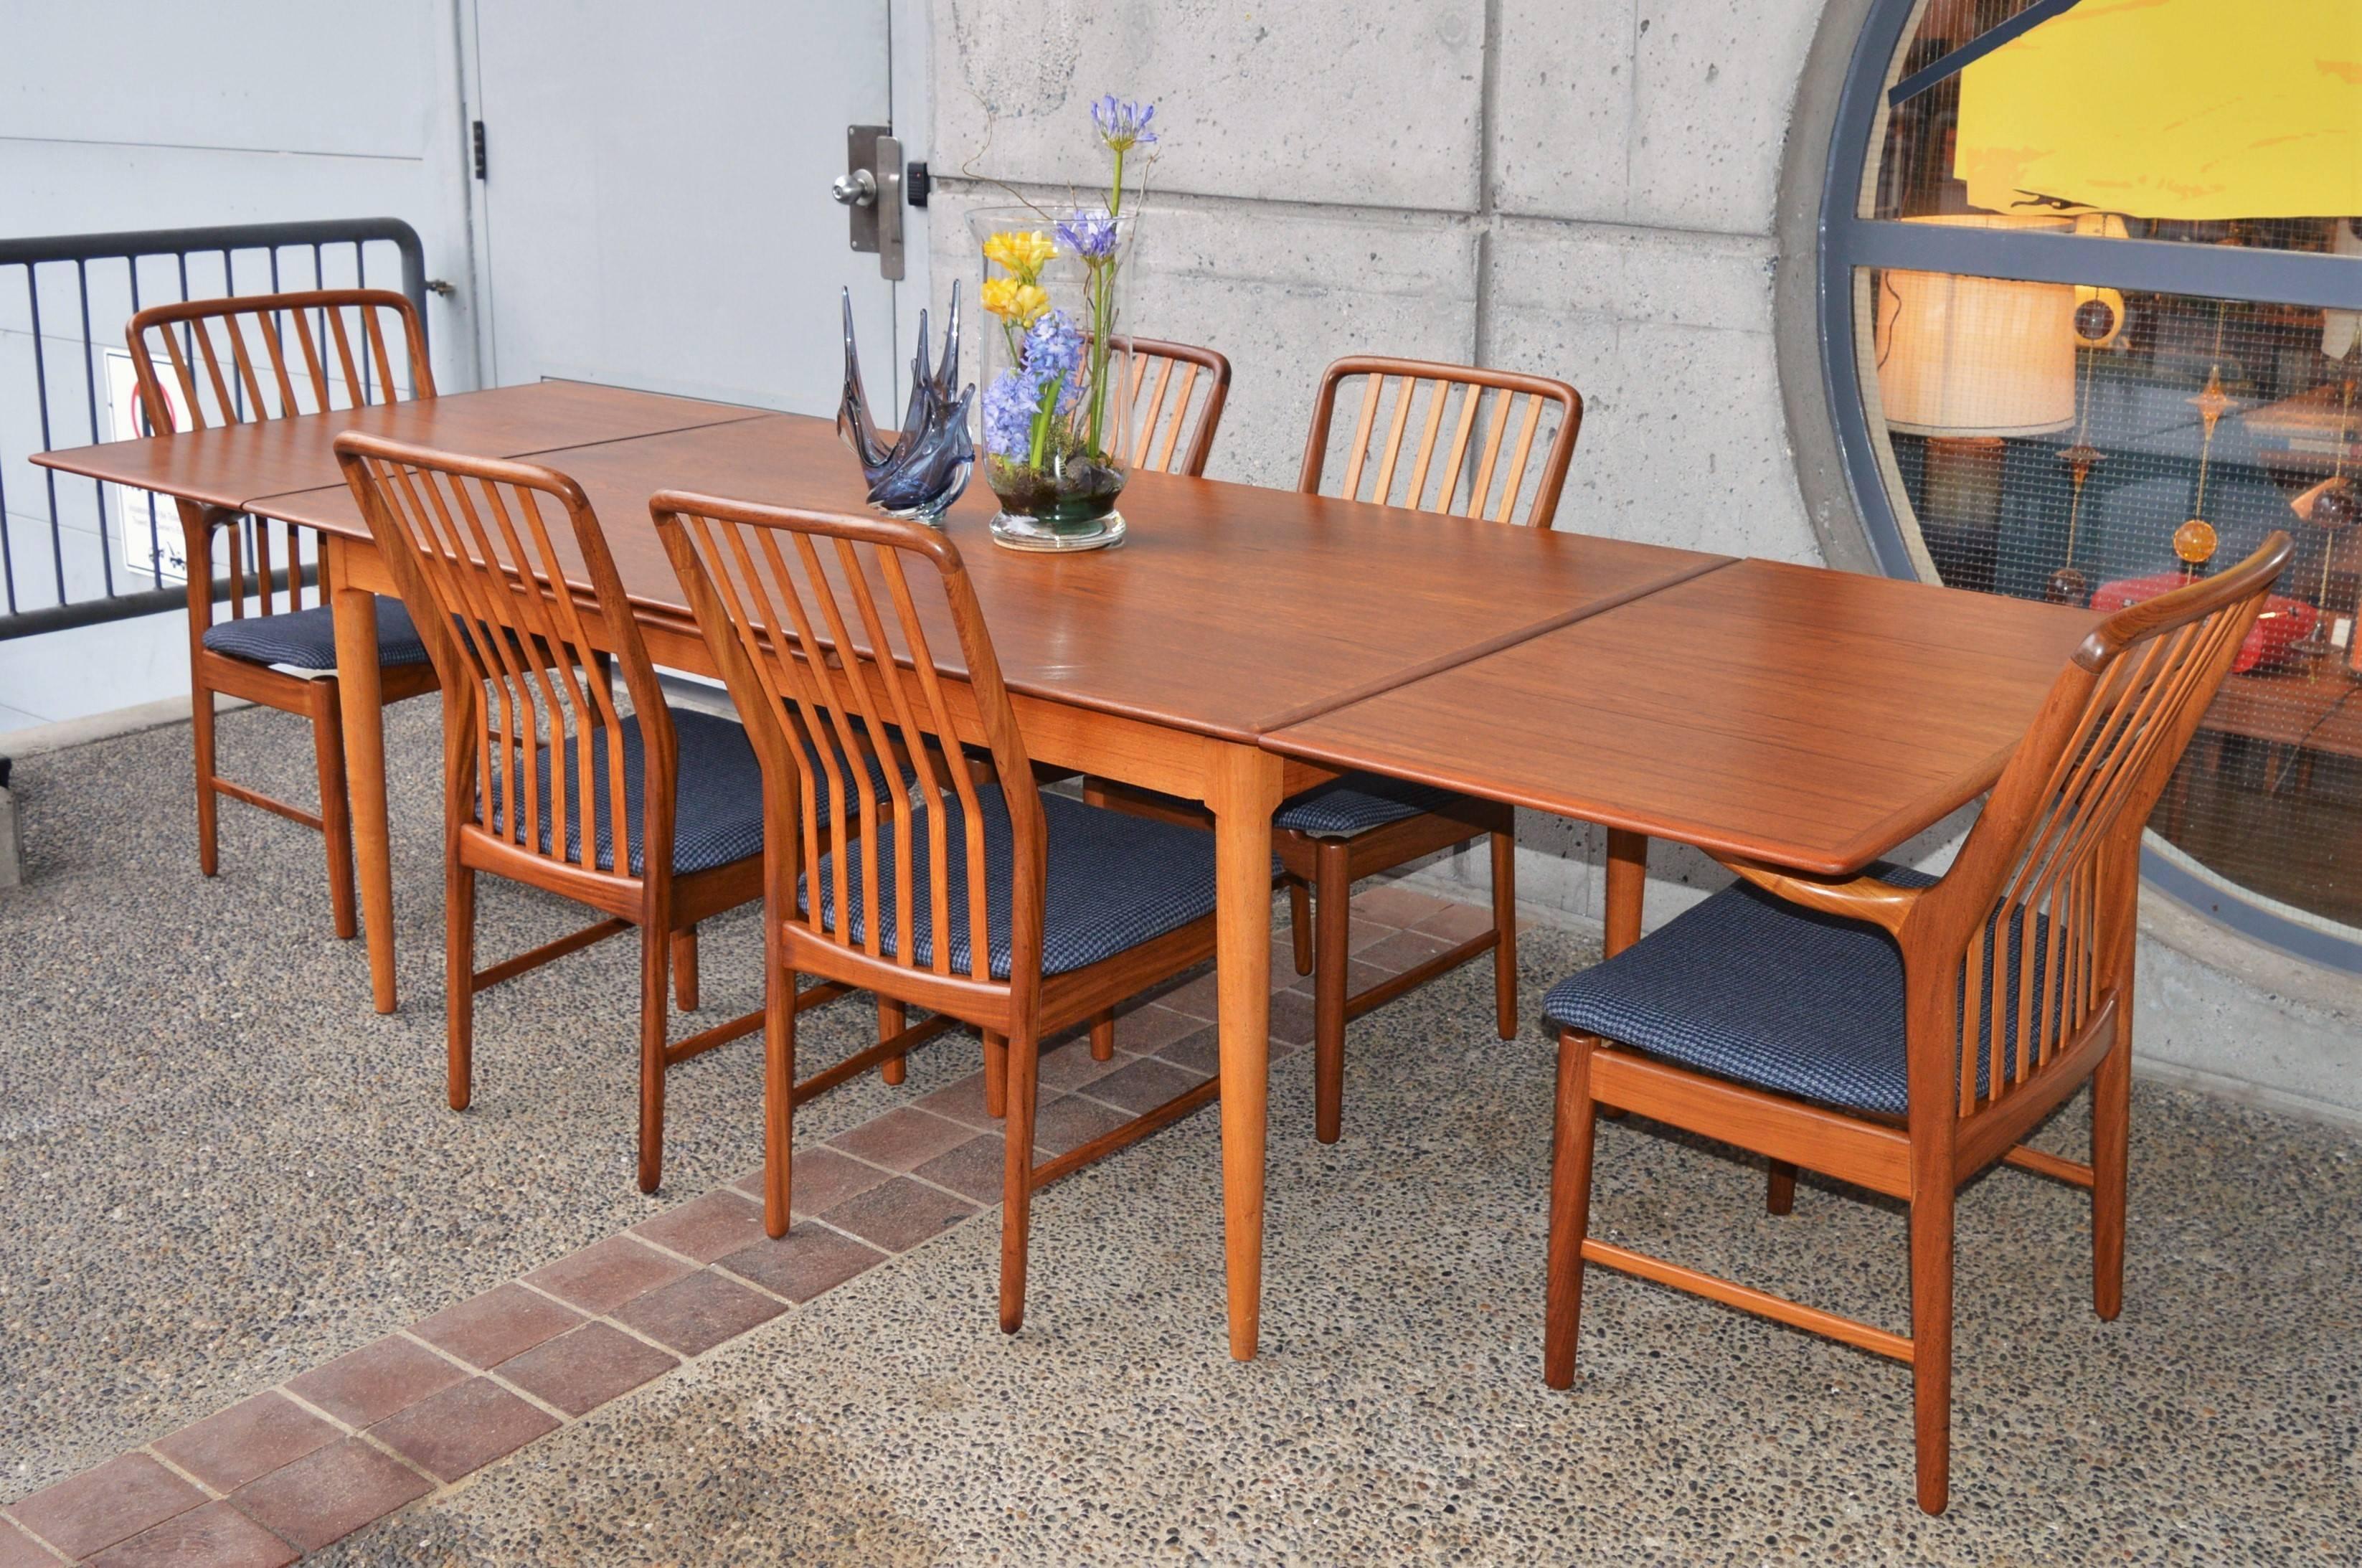 This awesome Danish modern teak draw leaf dining table is a much larger size that typical, with three chairs able to fit between the legs. It has two leaves that store under the tabletop and can be drawn from the ends as needed. With the leaves